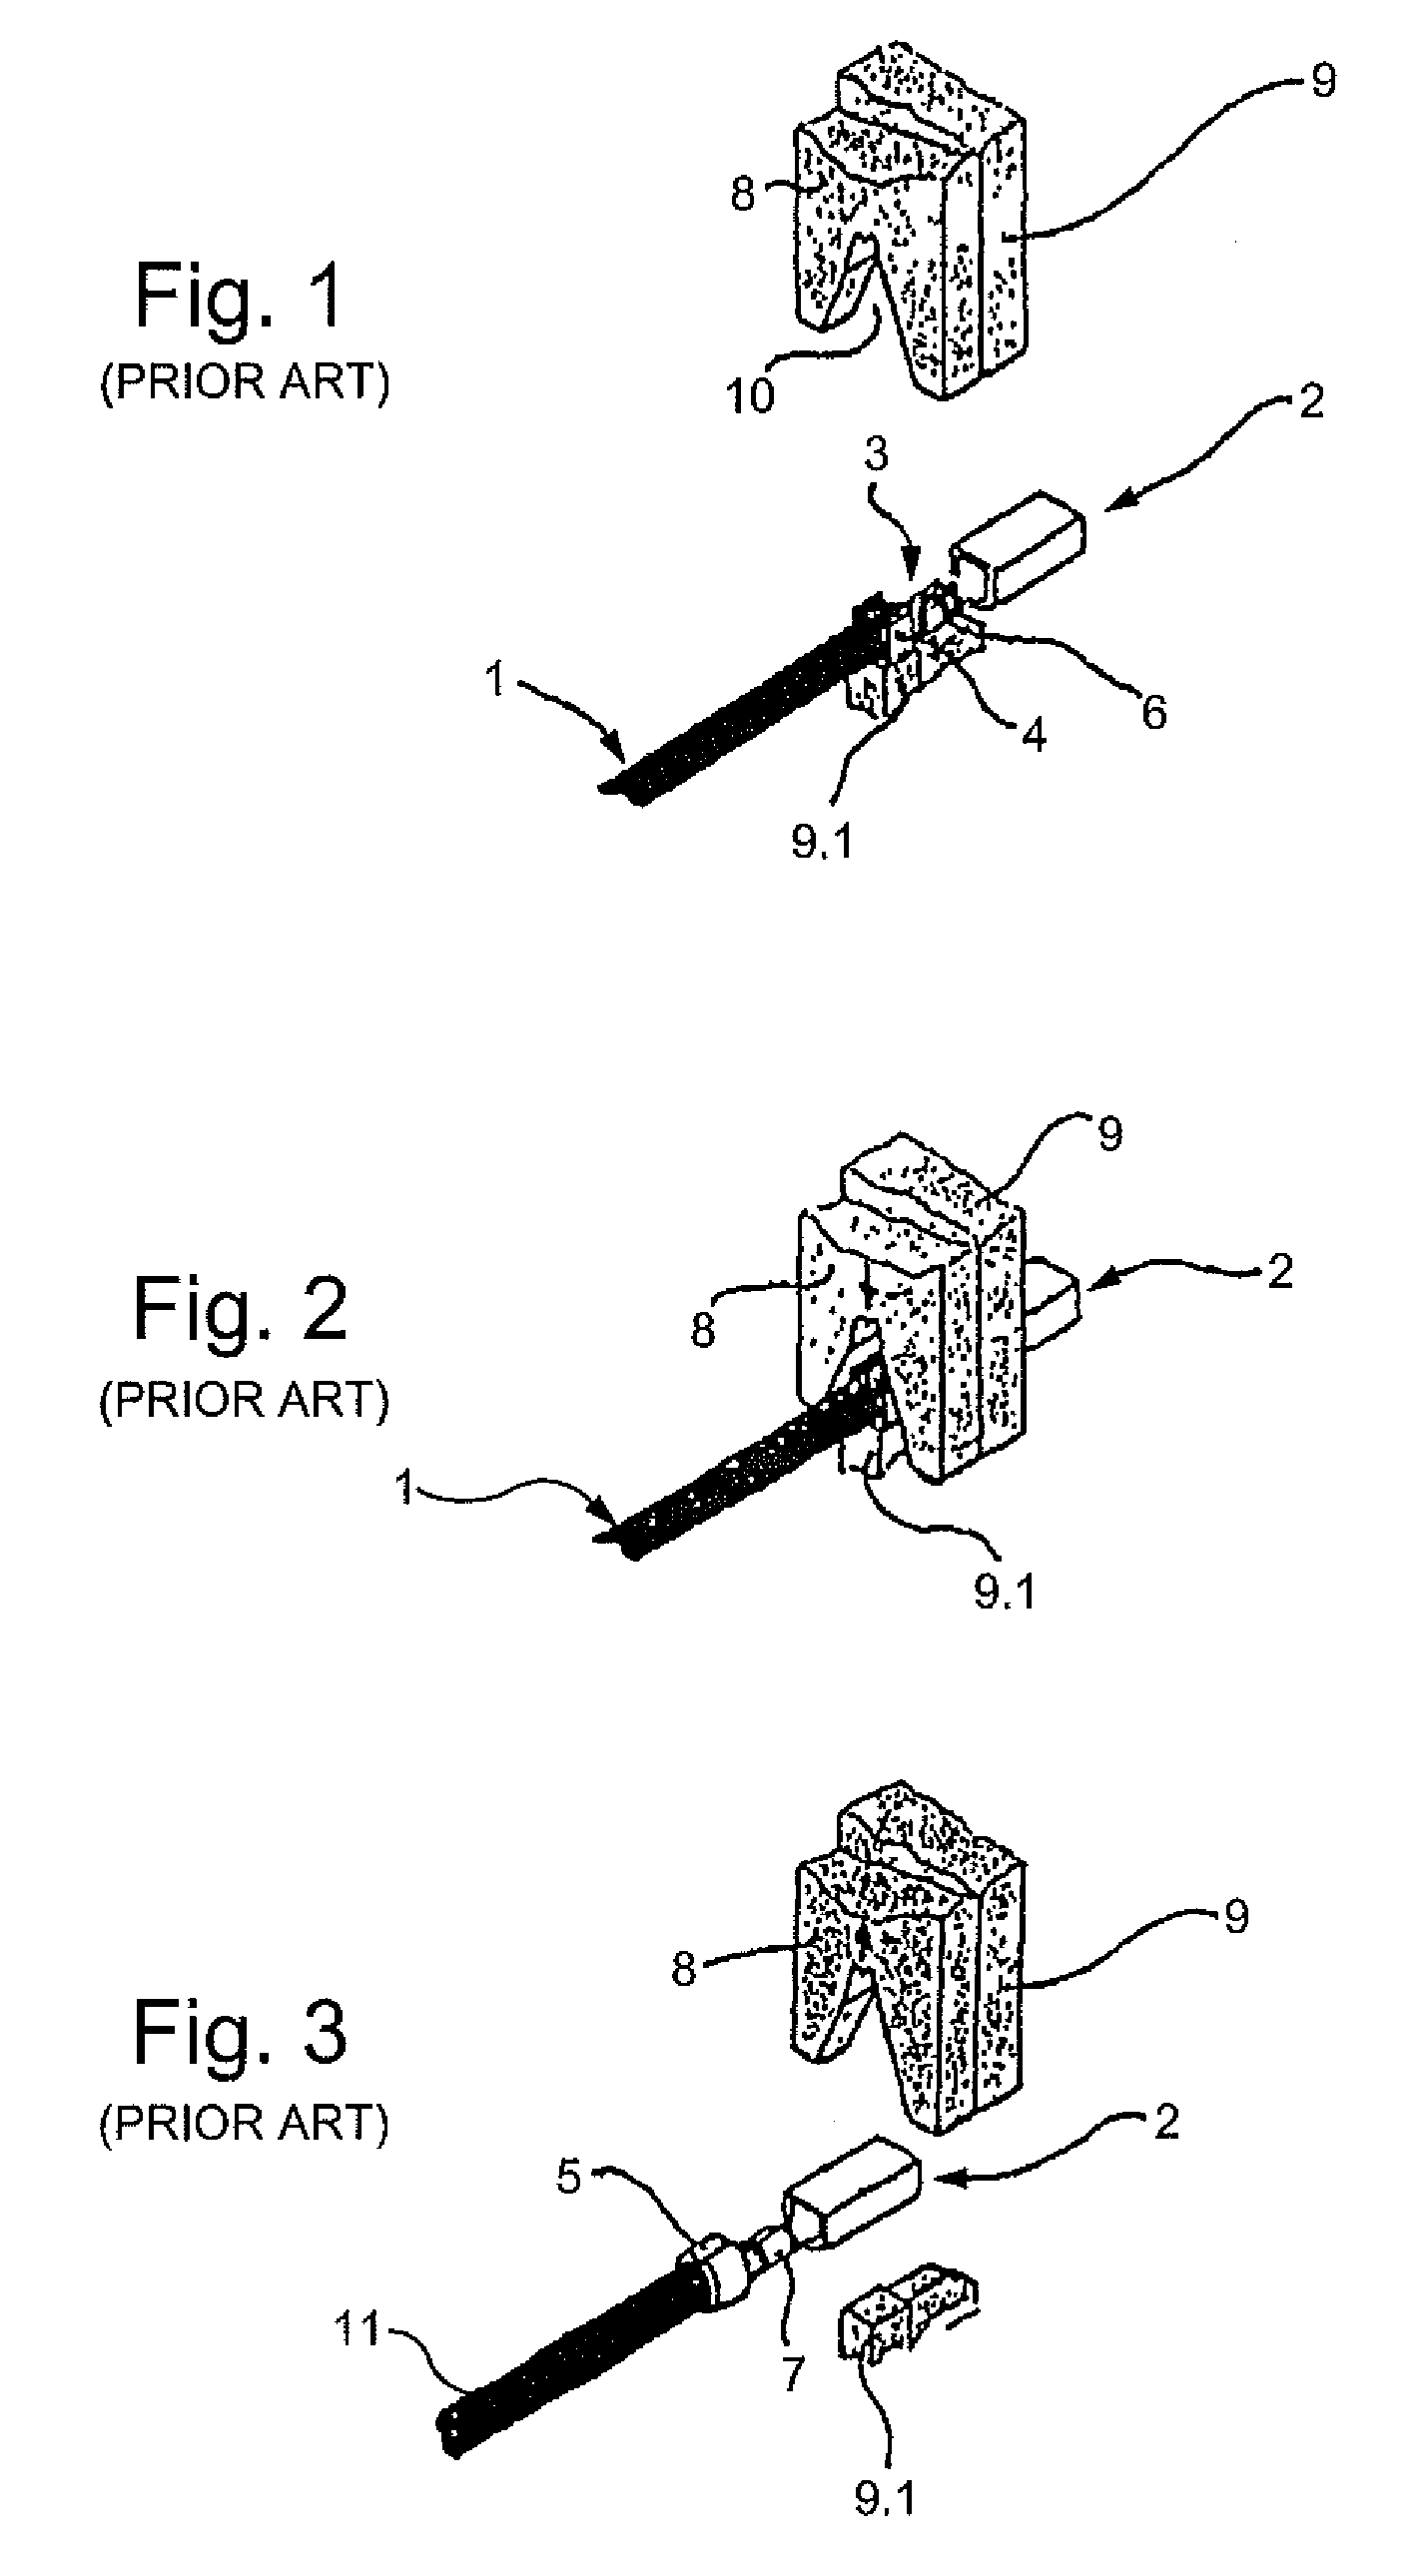 Method for determining the quality of a crimped connection between a conductor and a contact